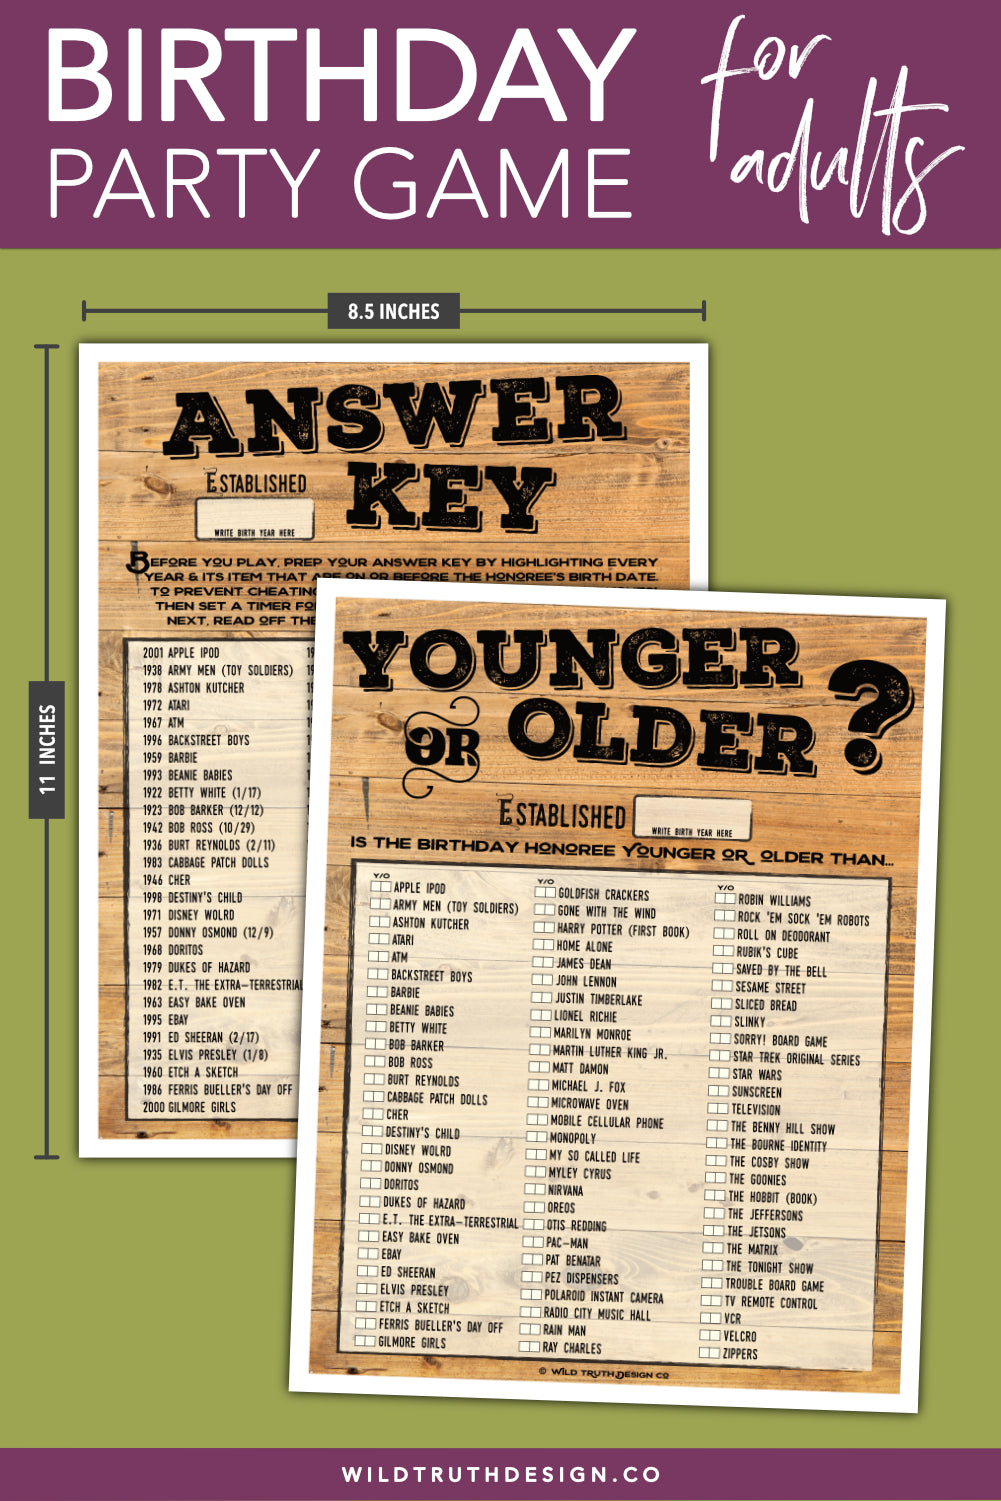 Printable Birthday Party Game Men - Younger Older